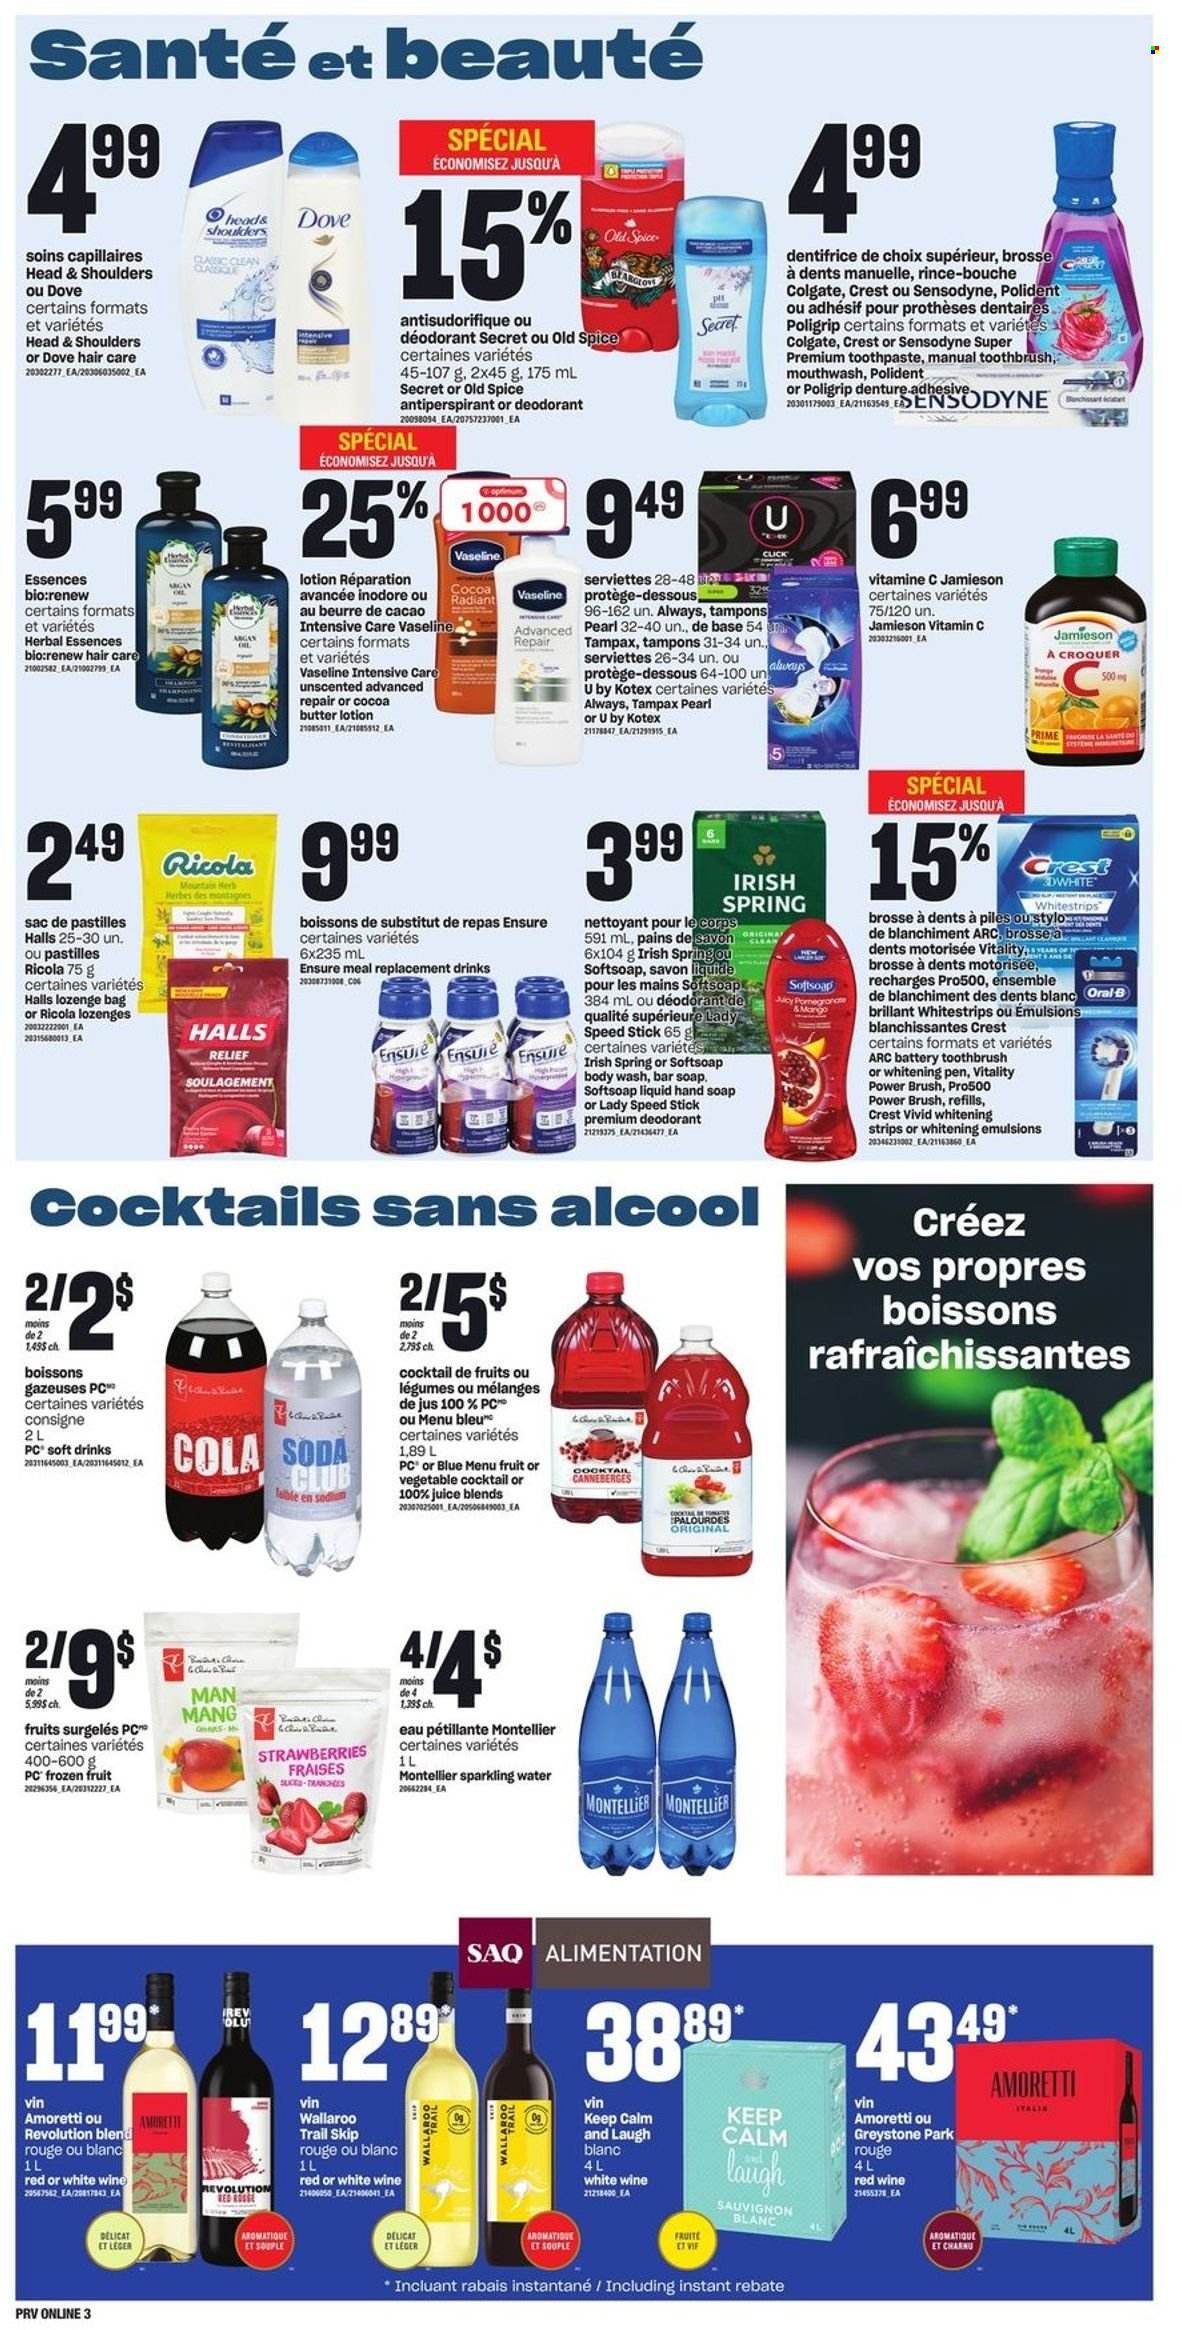 thumbnail - Provigo Flyer - June 30, 2022 - July 06, 2022 - Sales products - strips, Ricola, Halls, pastilles, rice, spice, herbs, juice, soft drink, soda, sparkling water, red wine, wine, Sauvignon Blanc, body wash, Softsoap, hand soap, Vaseline, soap bar, soap, toothbrush, toothpaste, mouthwash, Polident, Crest, Kotex, tampons, Herbal Essences, body lotion, anti-perspirant, Speed Stick, bag, vitamin c, Dove, Colgate, Tampax, Head & Shoulders, Old Spice, Oral-B, Sensodyne, deodorant. Page 11.